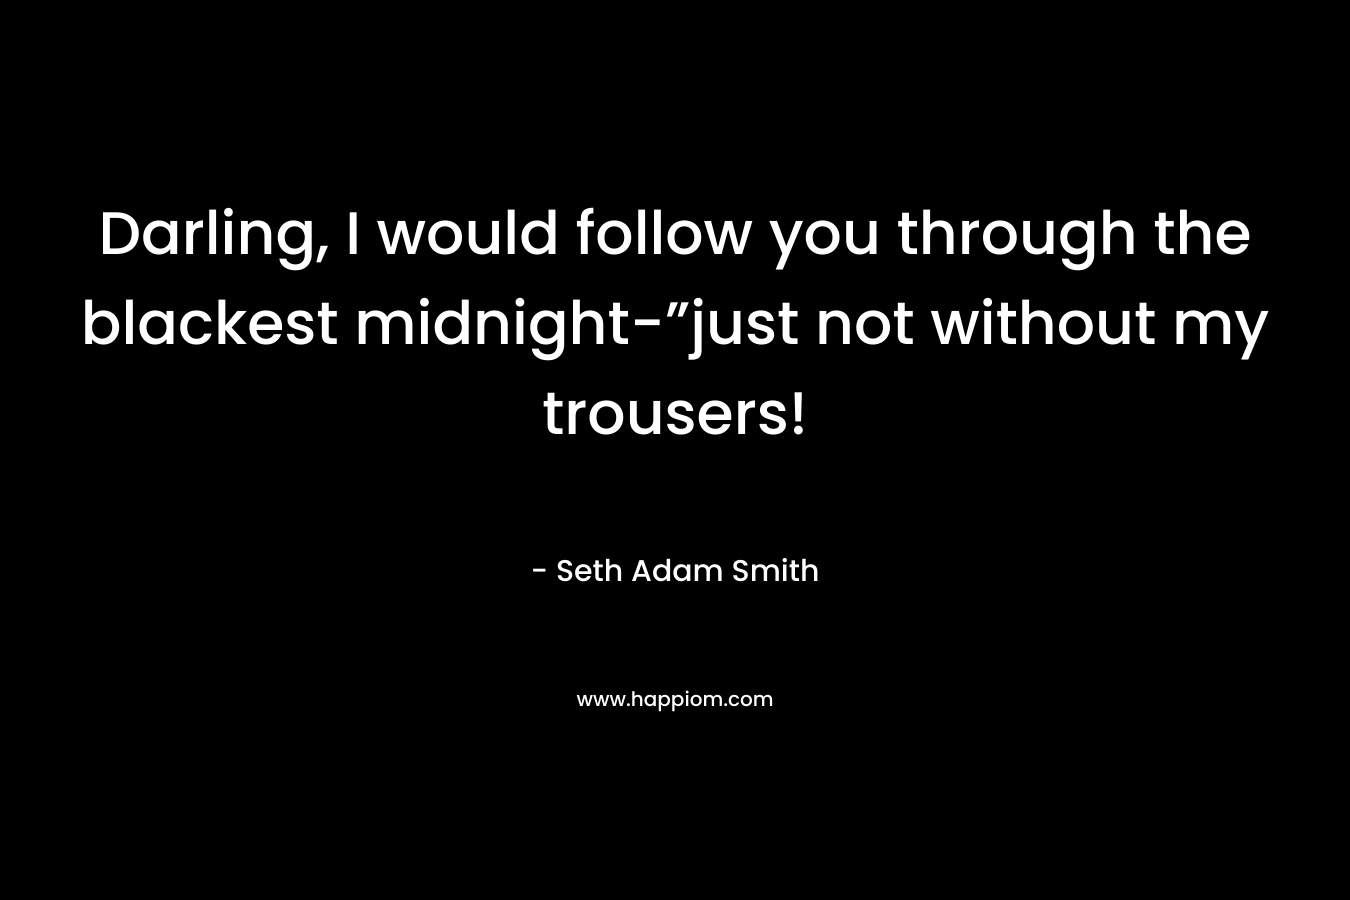 Darling, I would follow you through the blackest midnight-”just not without my trousers!